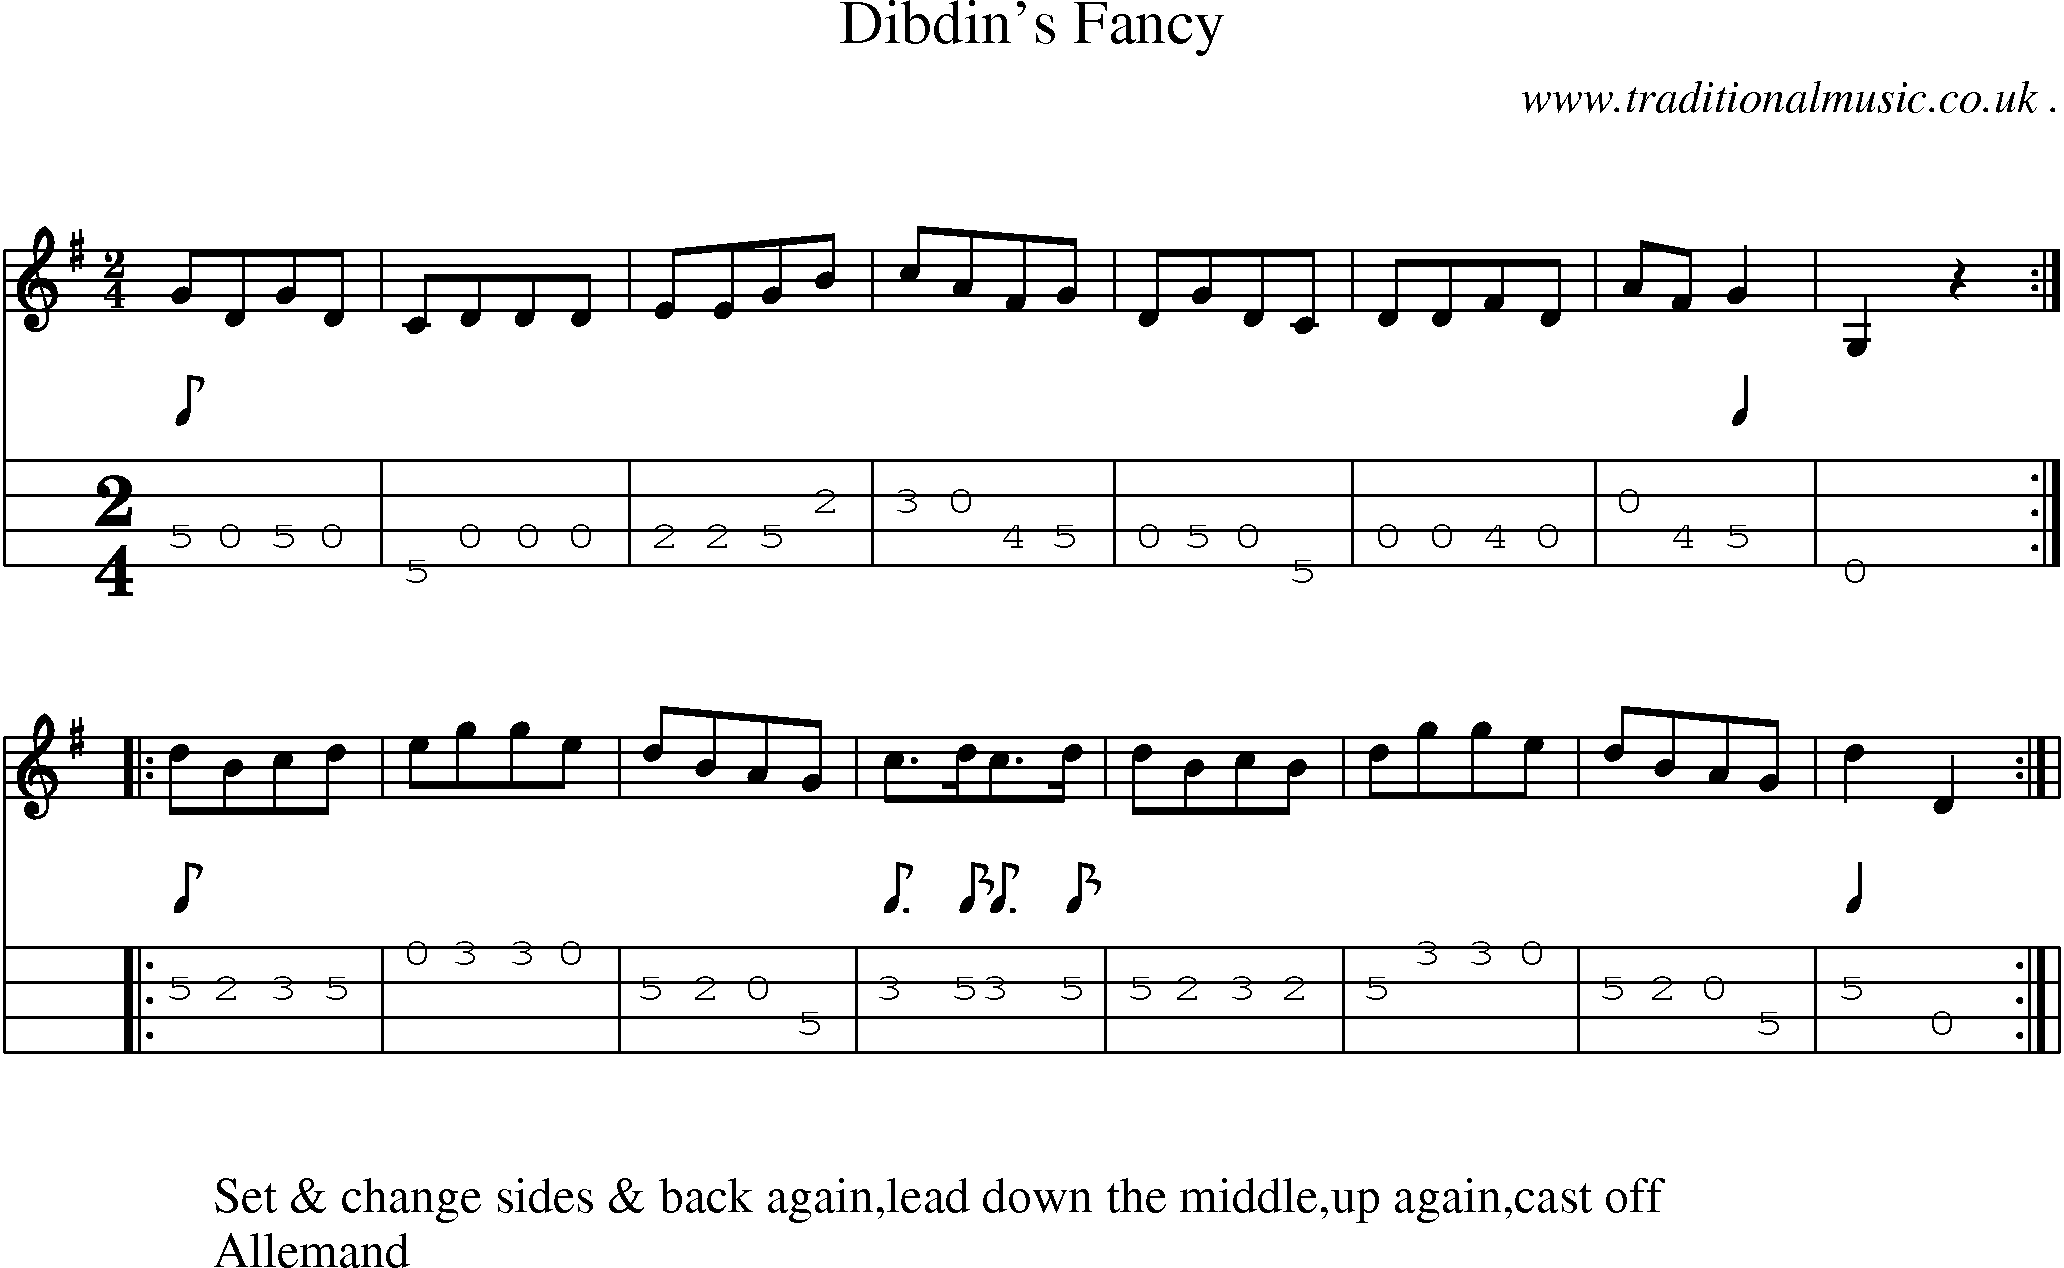 Sheet-Music and Mandolin Tabs for Dibdins Fancy